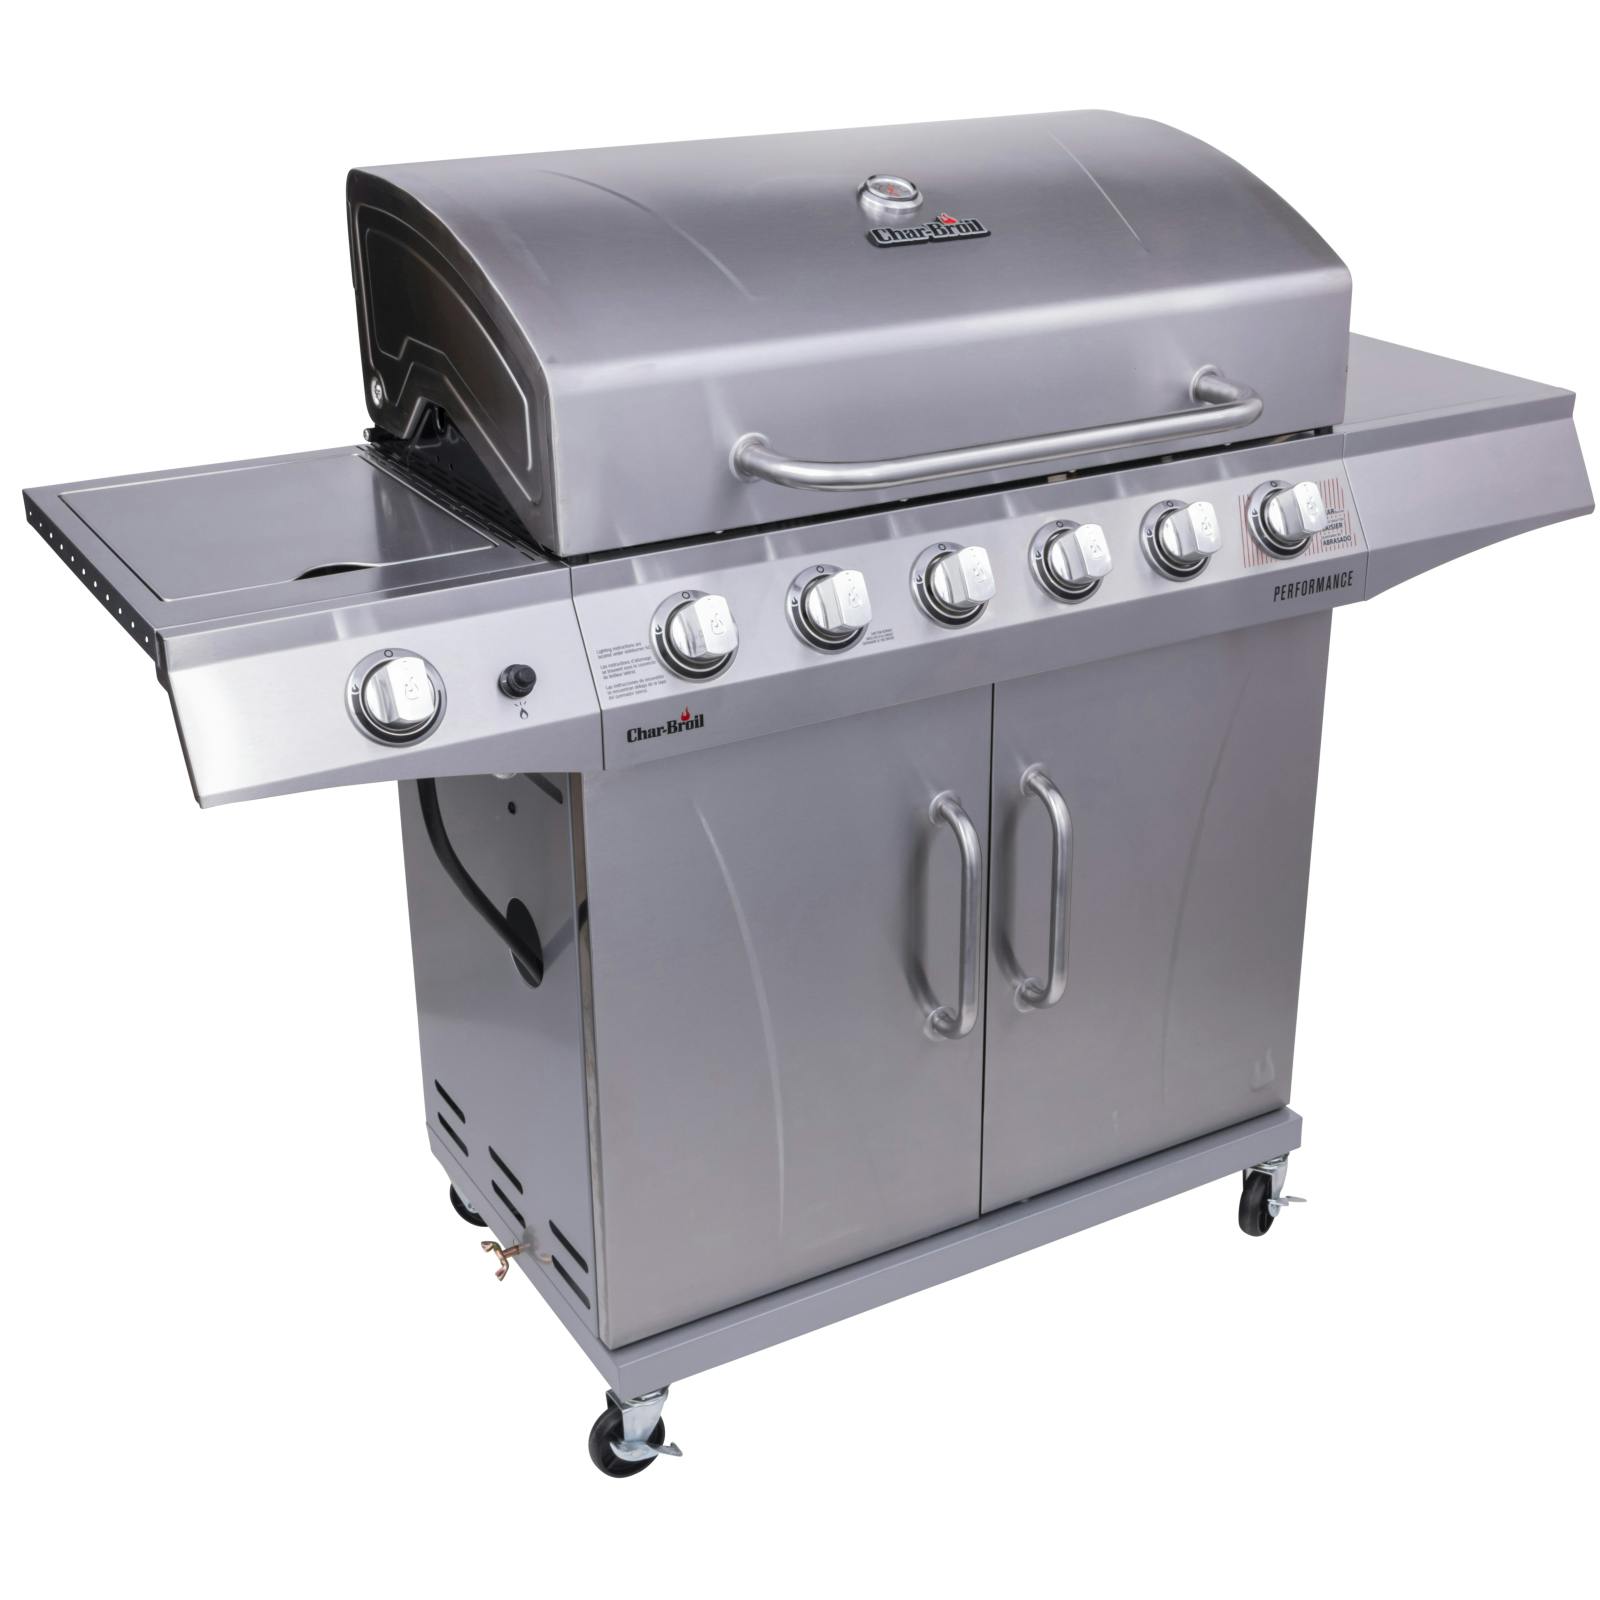 Product image of Chari-Broil PERFORMANCE SERIES™
6-BURNER GAS GRILL